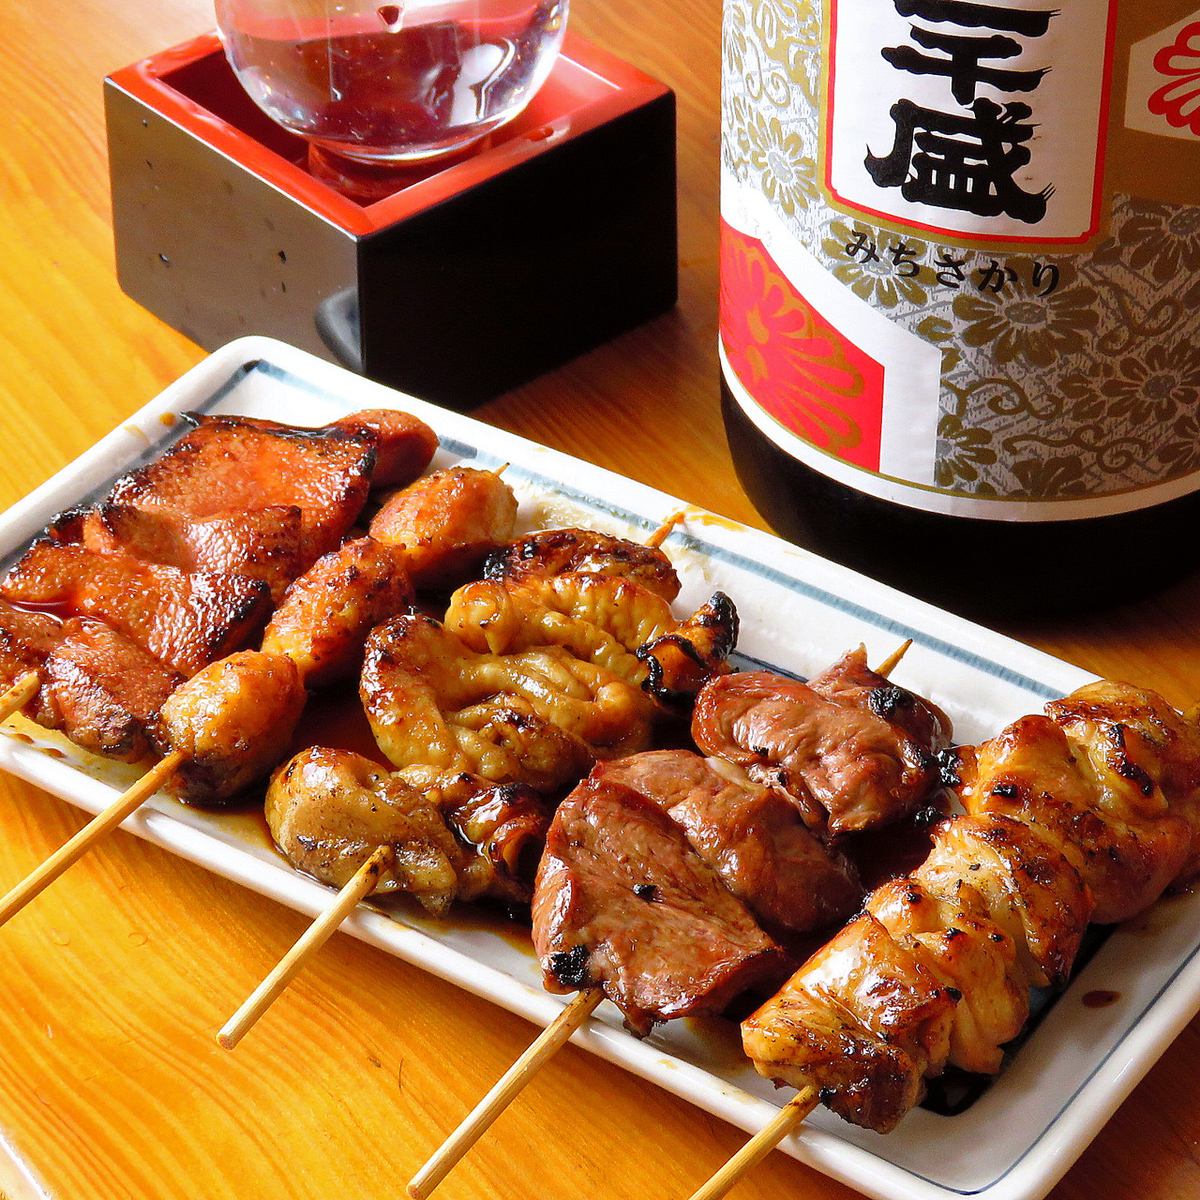 An old-fashioned popular izakaya that has been in business for over 60 years.